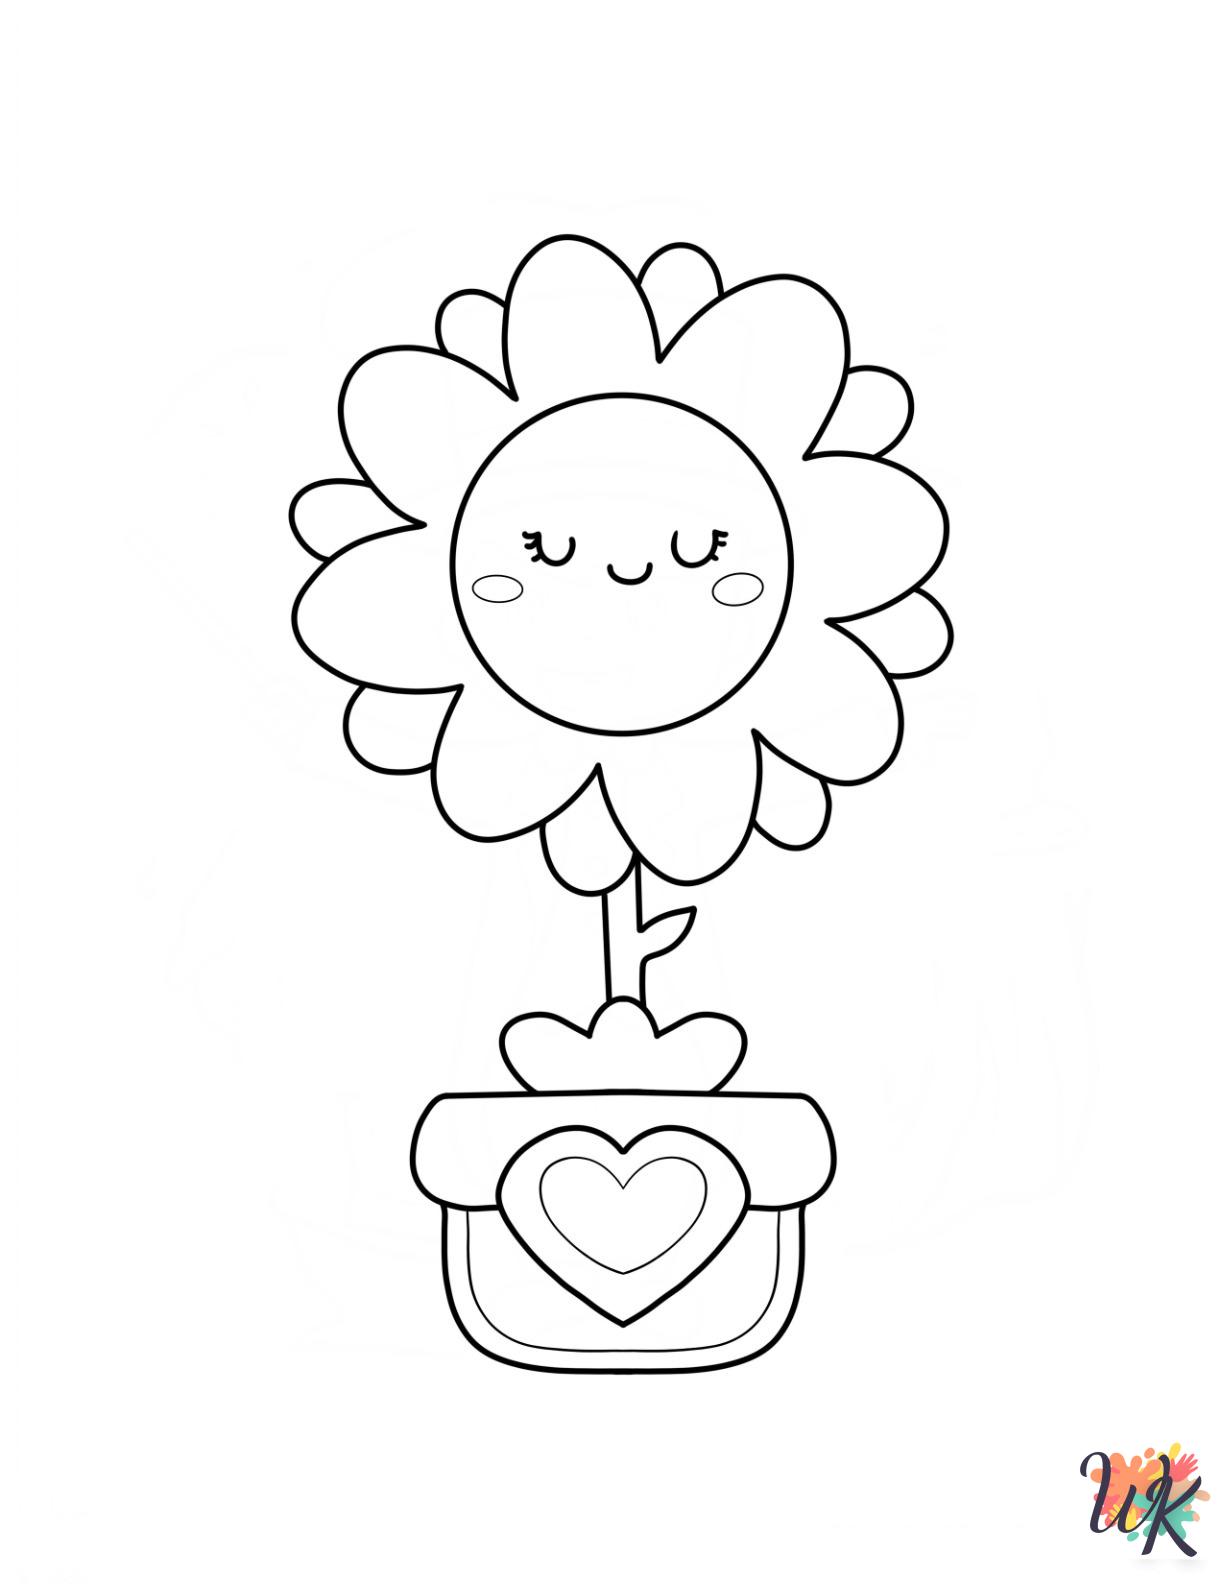 Spring ornaments coloring pages